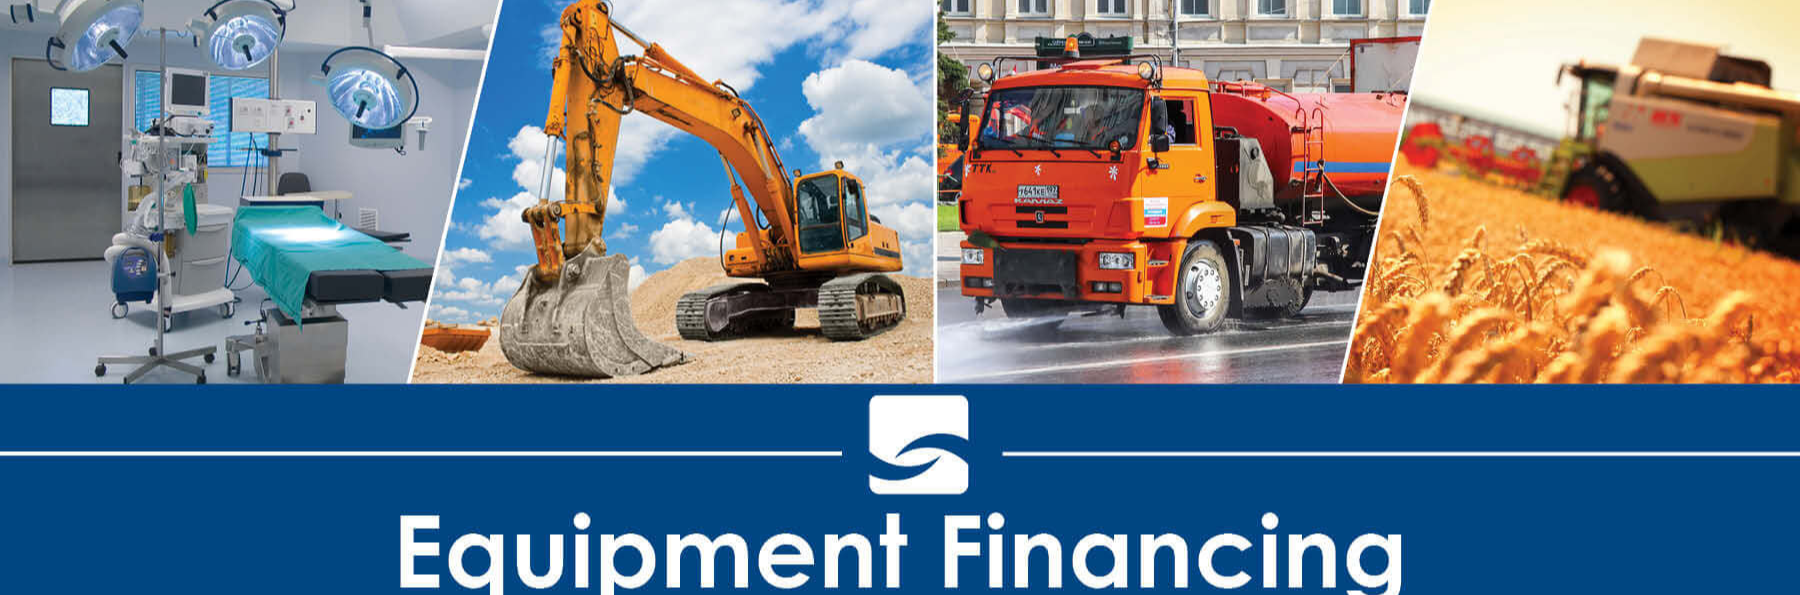 May 31, 2020 1800 × 595 Apply For Small Business Loan 100 Equipment Financing